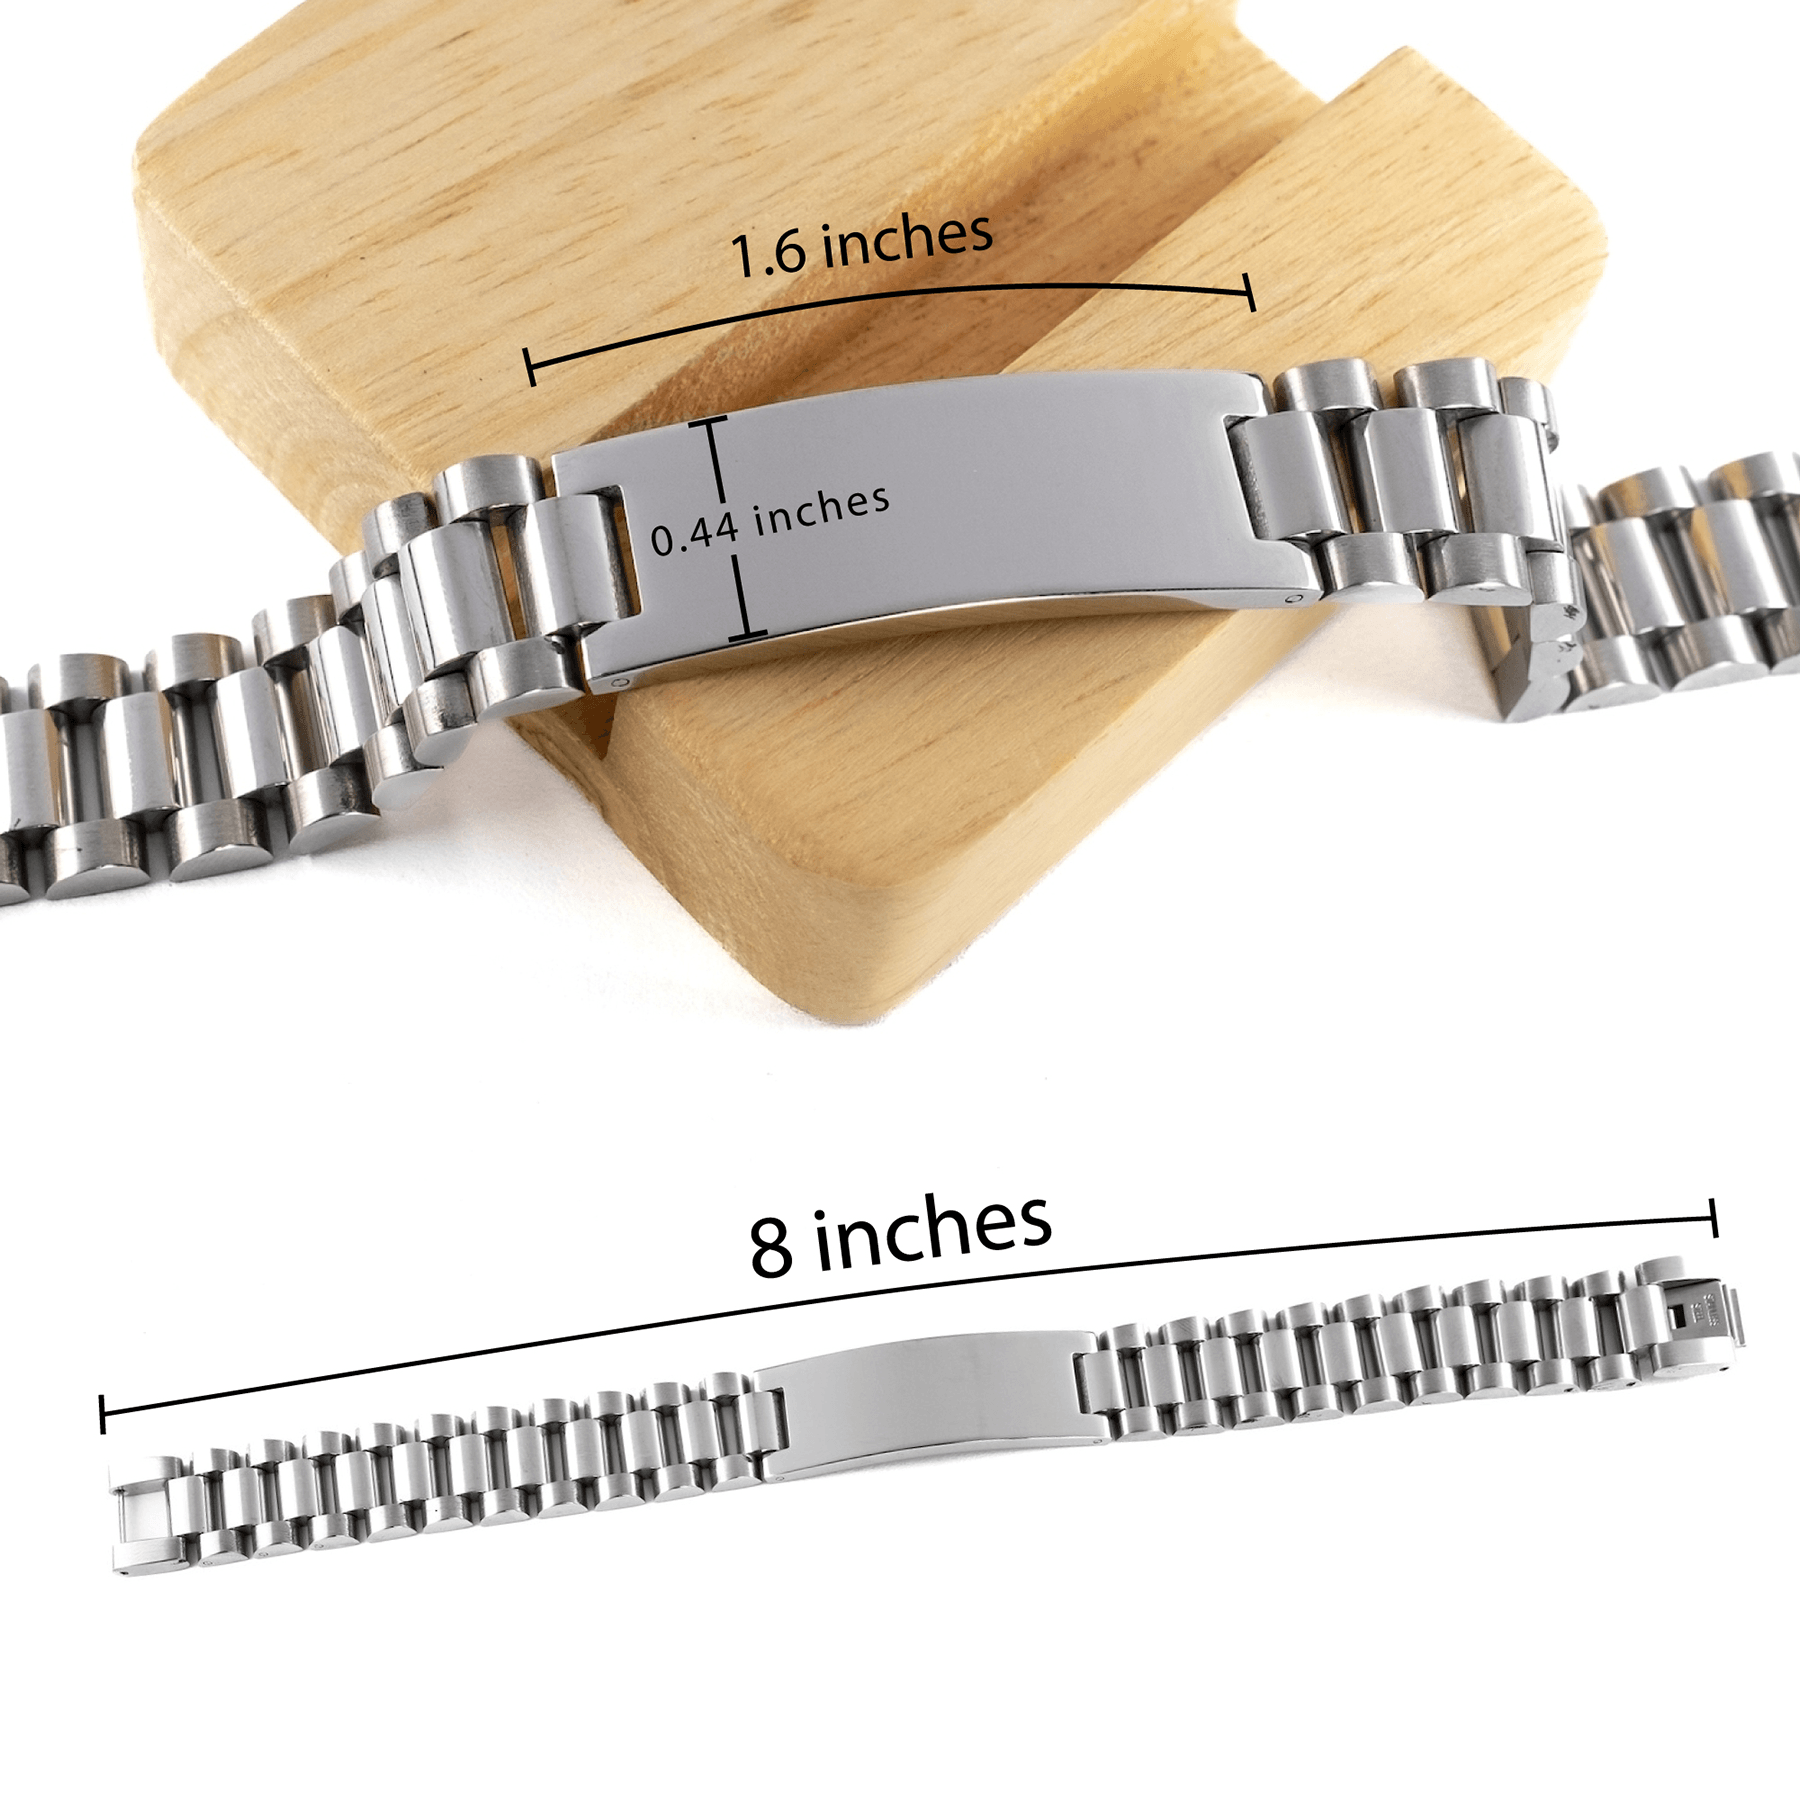 Case Manager Ladder Stainless Steel Engraved Bracelet - Thanks for being who you are - Birthday Christmas Jewelry Gifts Coworkers Colleague Boss - Mallard Moon Gift Shop